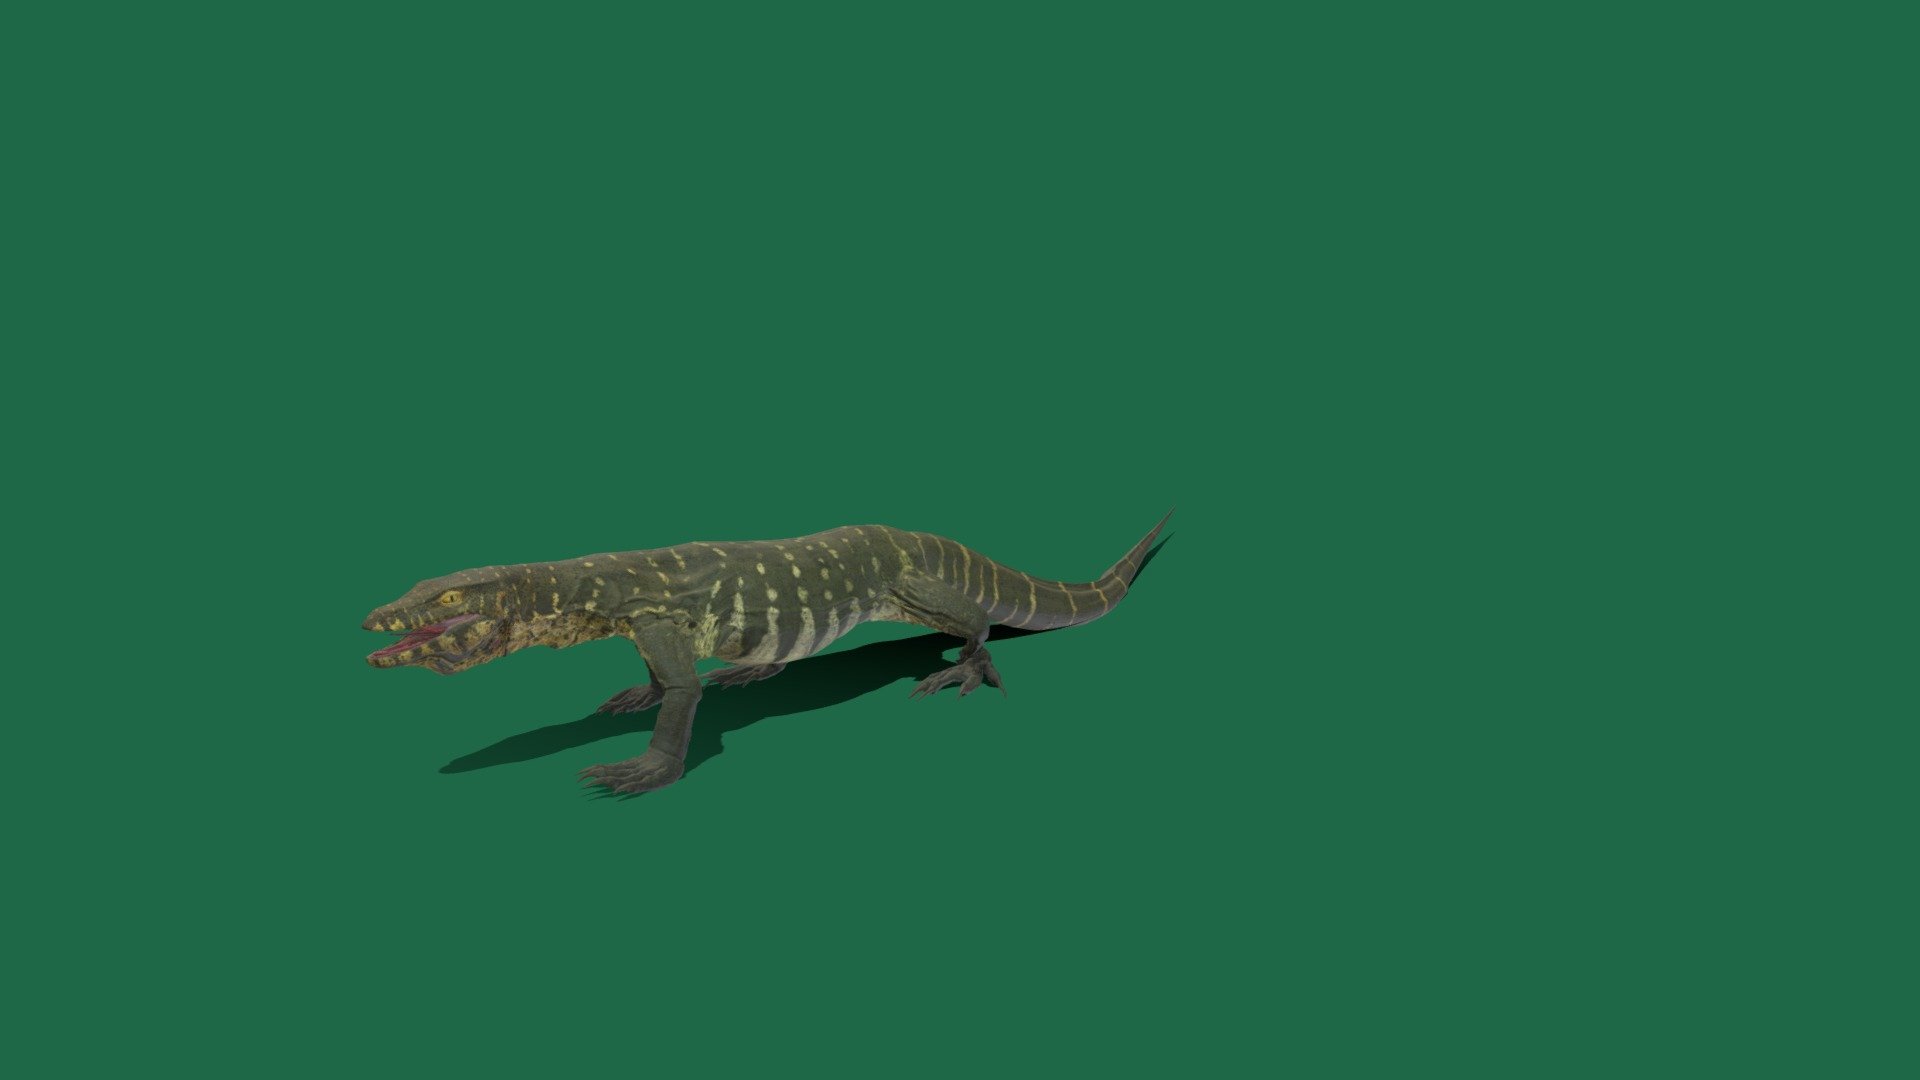 ****Credits to model artist -
https://skfb.ly/6TRzH

https://sketchfab.com/FreddyFoxFreddy
Lizards are a widespread group of squamate reptiles, with over 7,000 species, ranging across all continents except Antarctica, as well as most oceanic island chains - Lizard_VR_Test_V3 - 3D model by Nyilonelycompany 3d model